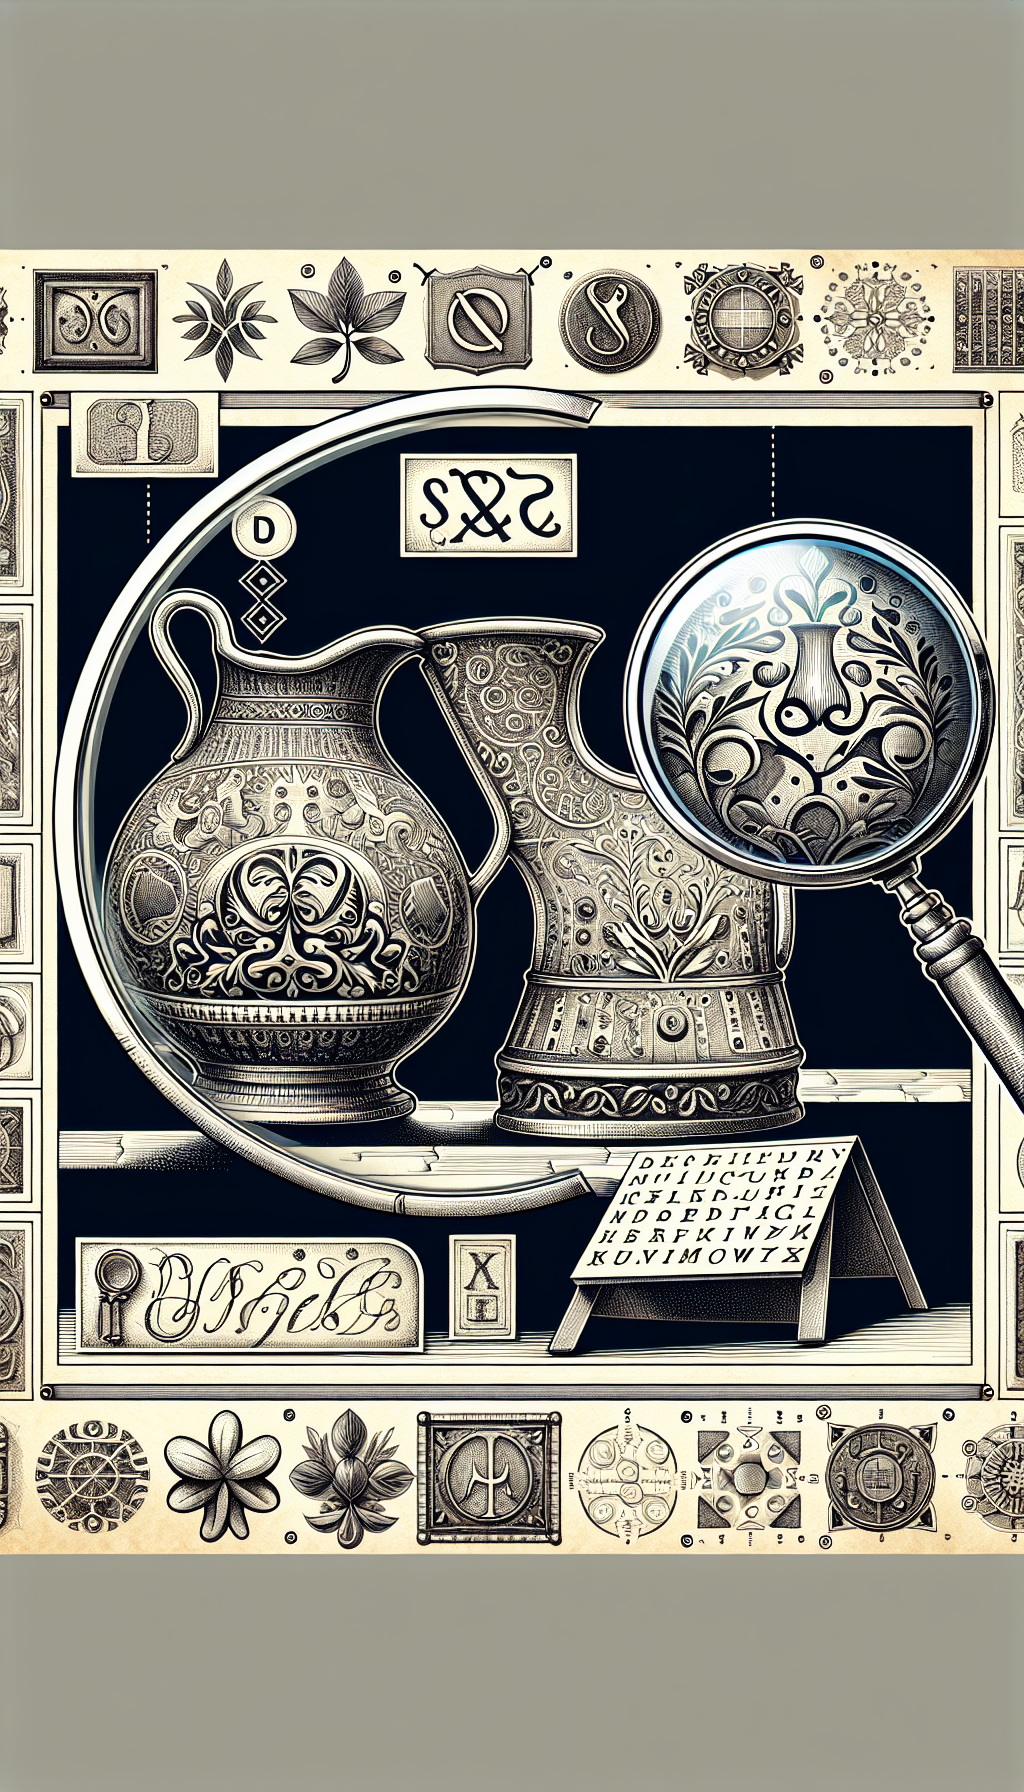 An illustration depicts a magnifying glass hovering over a patterned glass pitcher, revealing various makers' marks and signatures etched onto the surface. Each mark transforms into a distinct clue character—like cursive letters, old-fashioned monograms, and emblematic symbols—hinting at a whimsical treasure map spread out beneath the pitcher for antique identification.